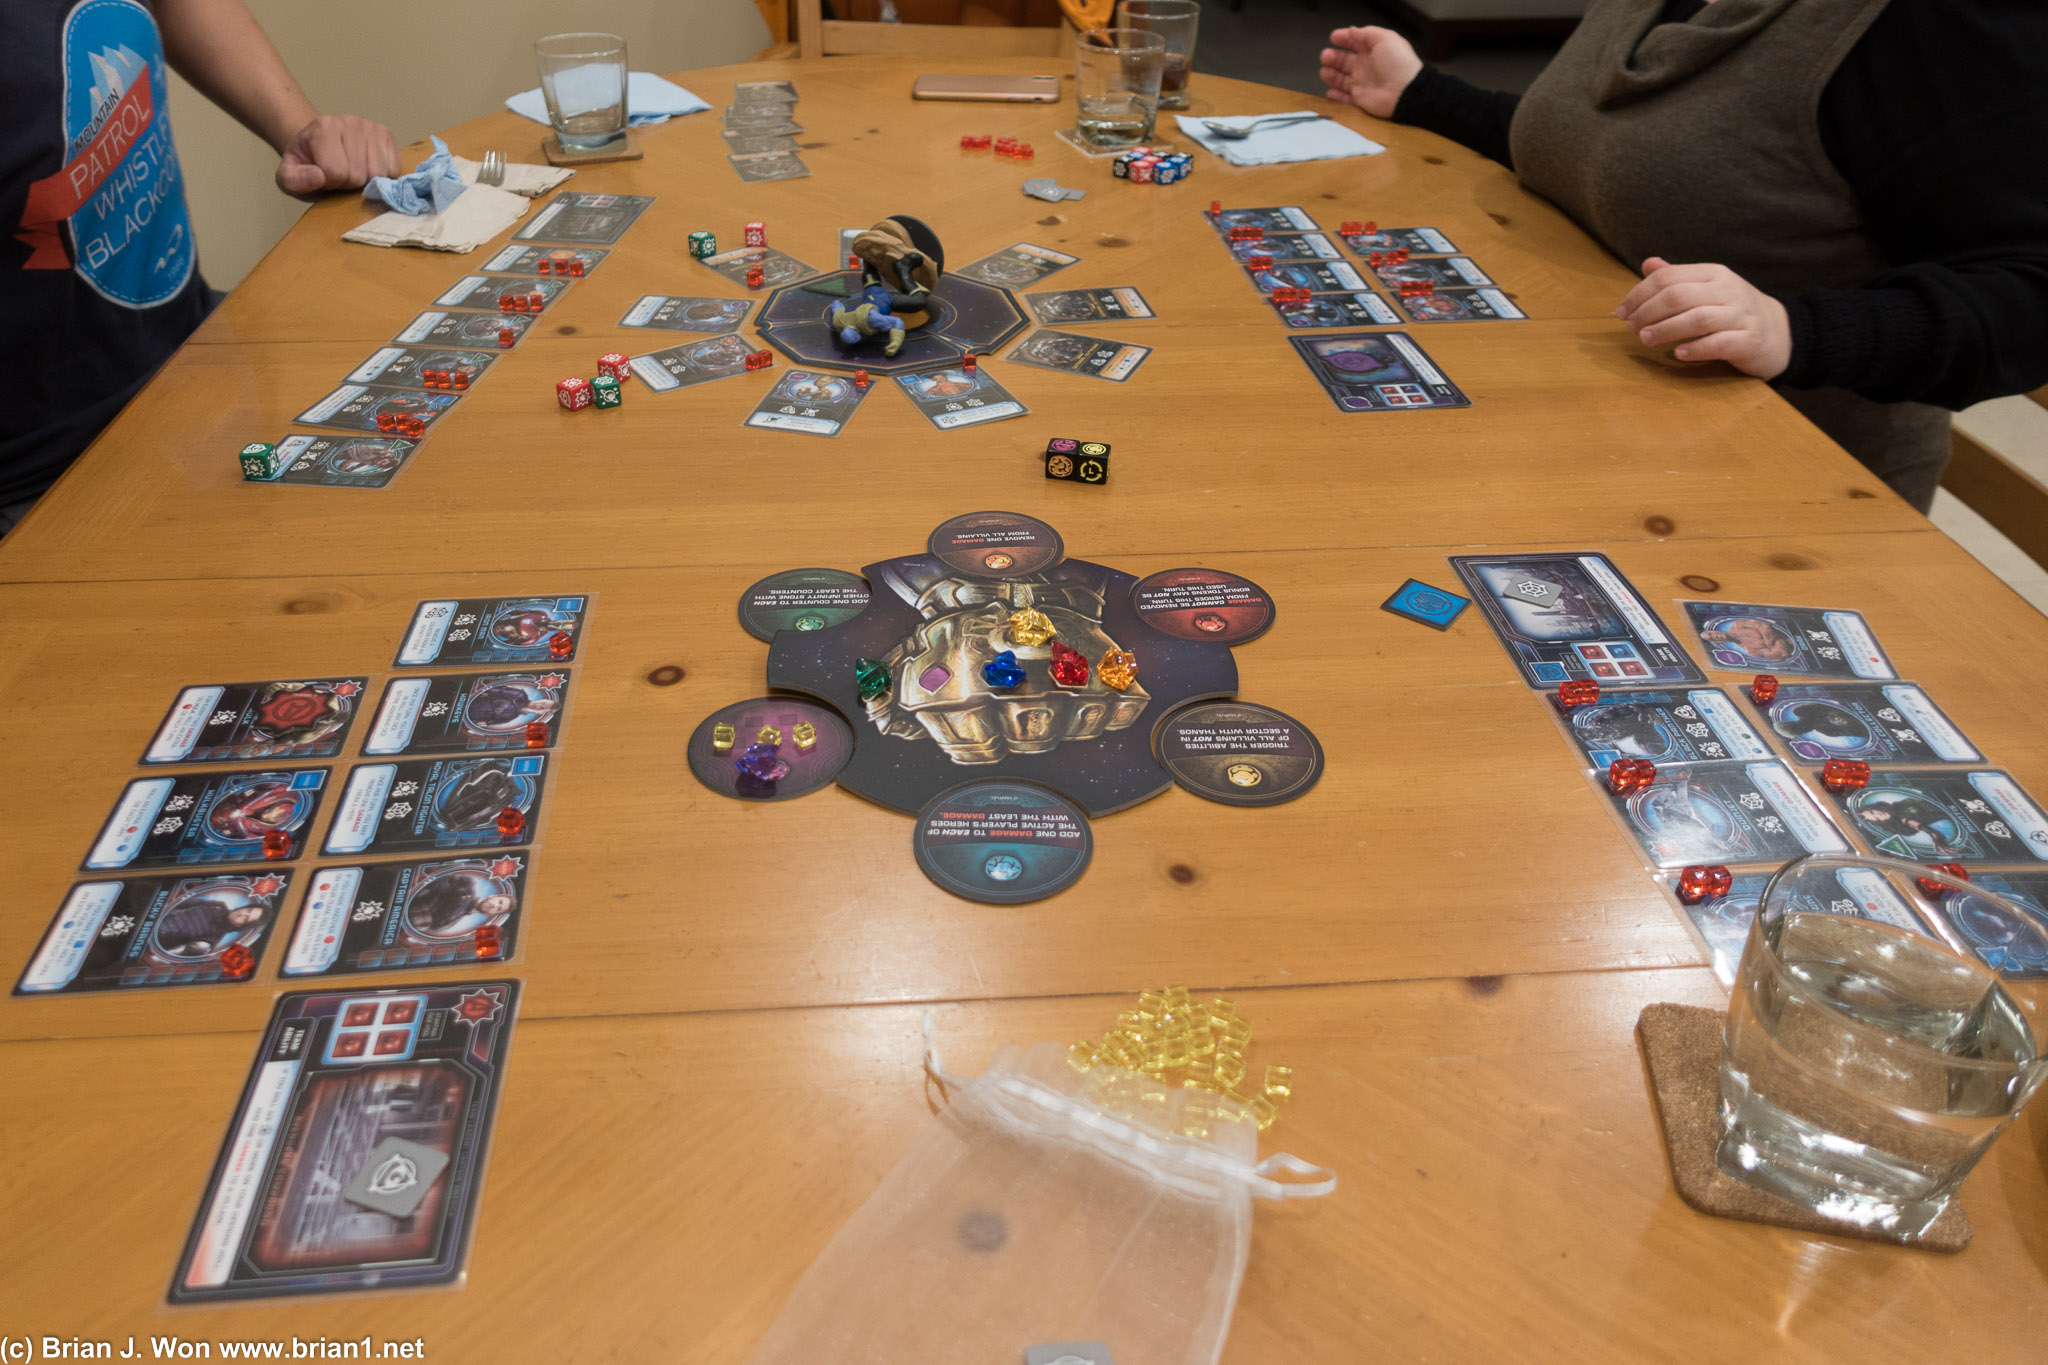 Thanos Rising: Avengers Infinity War, Ophelia's current favorite board game.